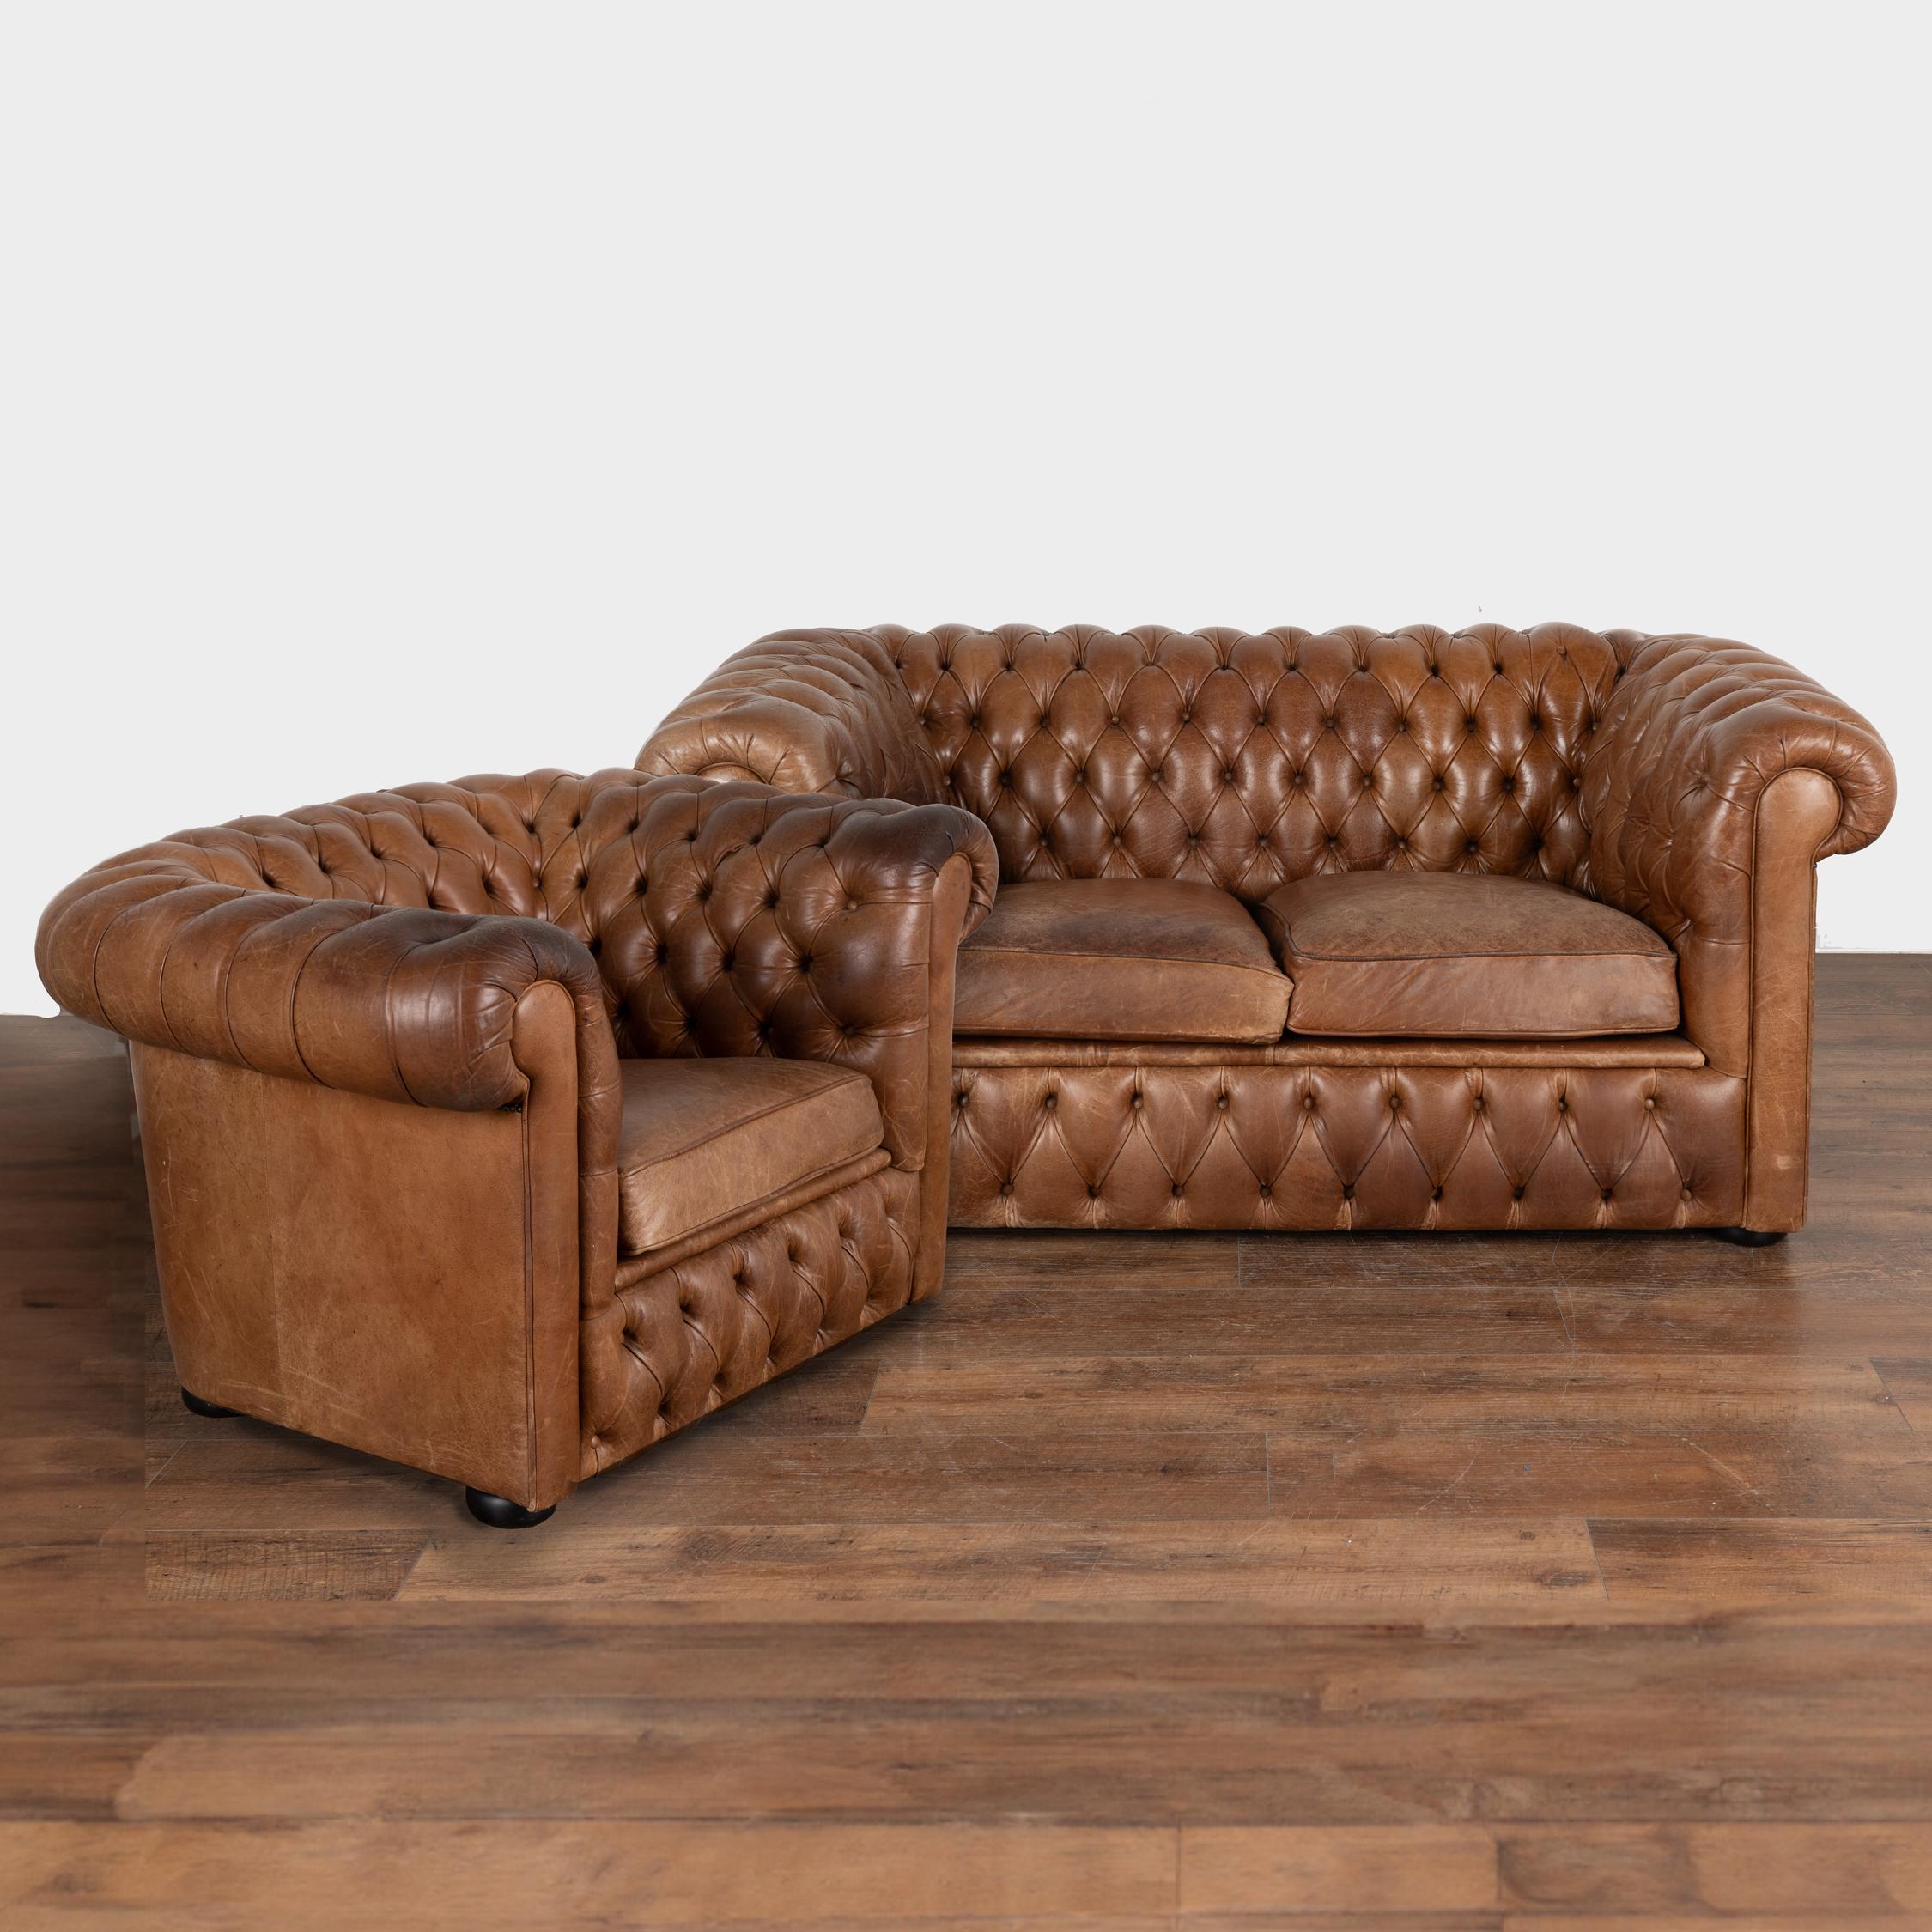 Loaded with character, this two seat sofa and club chair packs a vintage punch with the classic lines and tufted back of a classic Chesterfield sofa with self covered buttons and heavy rolled arms.
The vintage brown leather shows typical age related